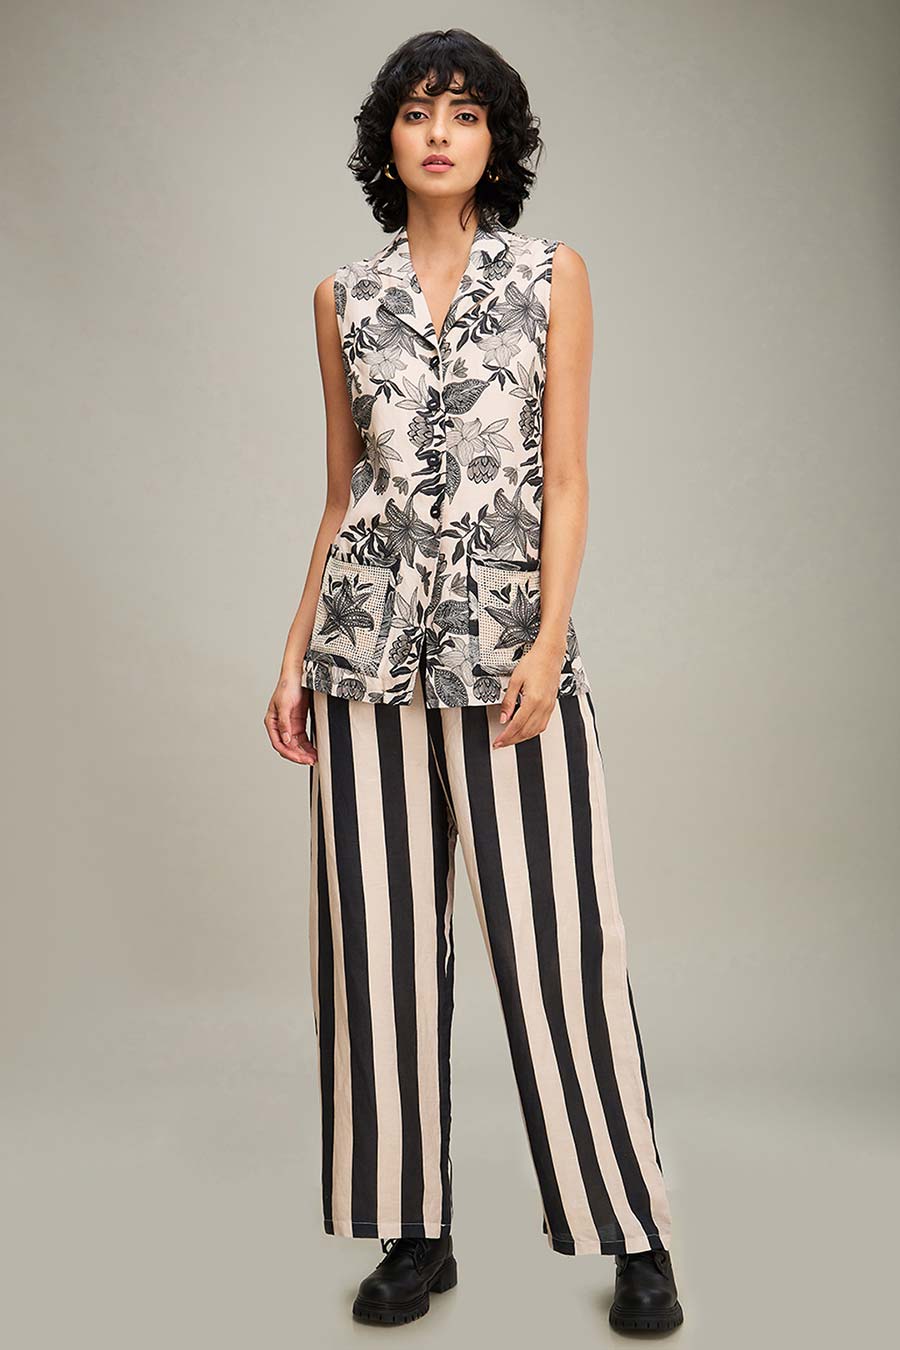 Off-White Ahyana Printed Top & Pant Co-Ord Set